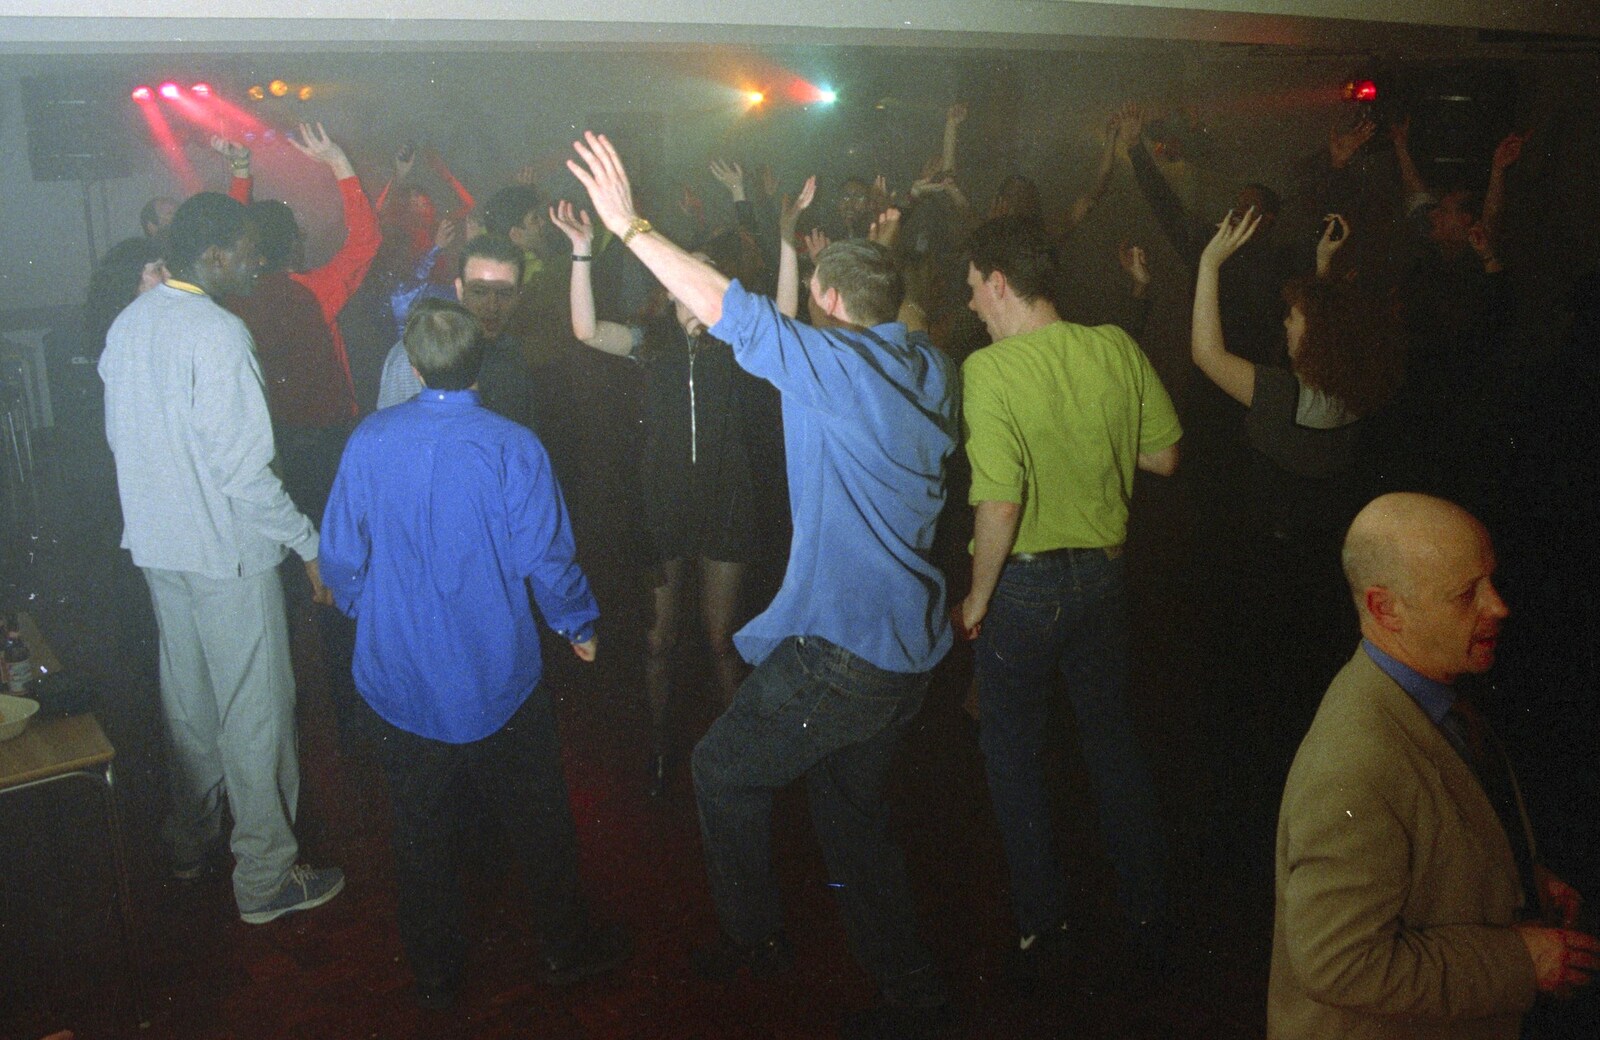 Even more hands from A CISU Thrash in the SCC Social Club, Rope Walk, Ipswich - 4th April 1998